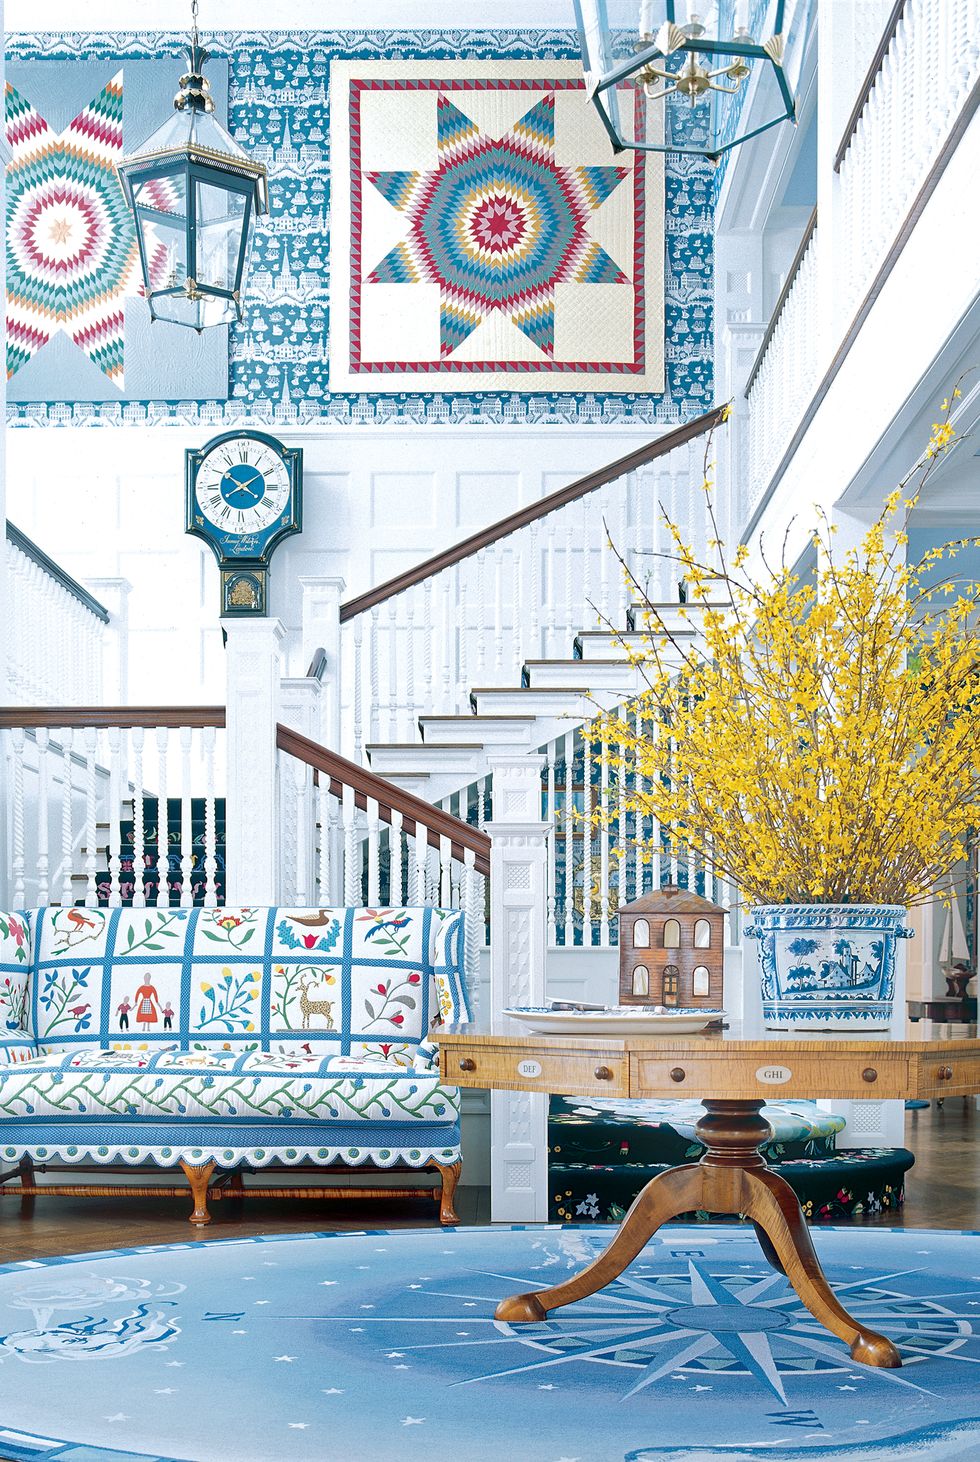 9 Mediterranean style tips to steal from this Greek villa